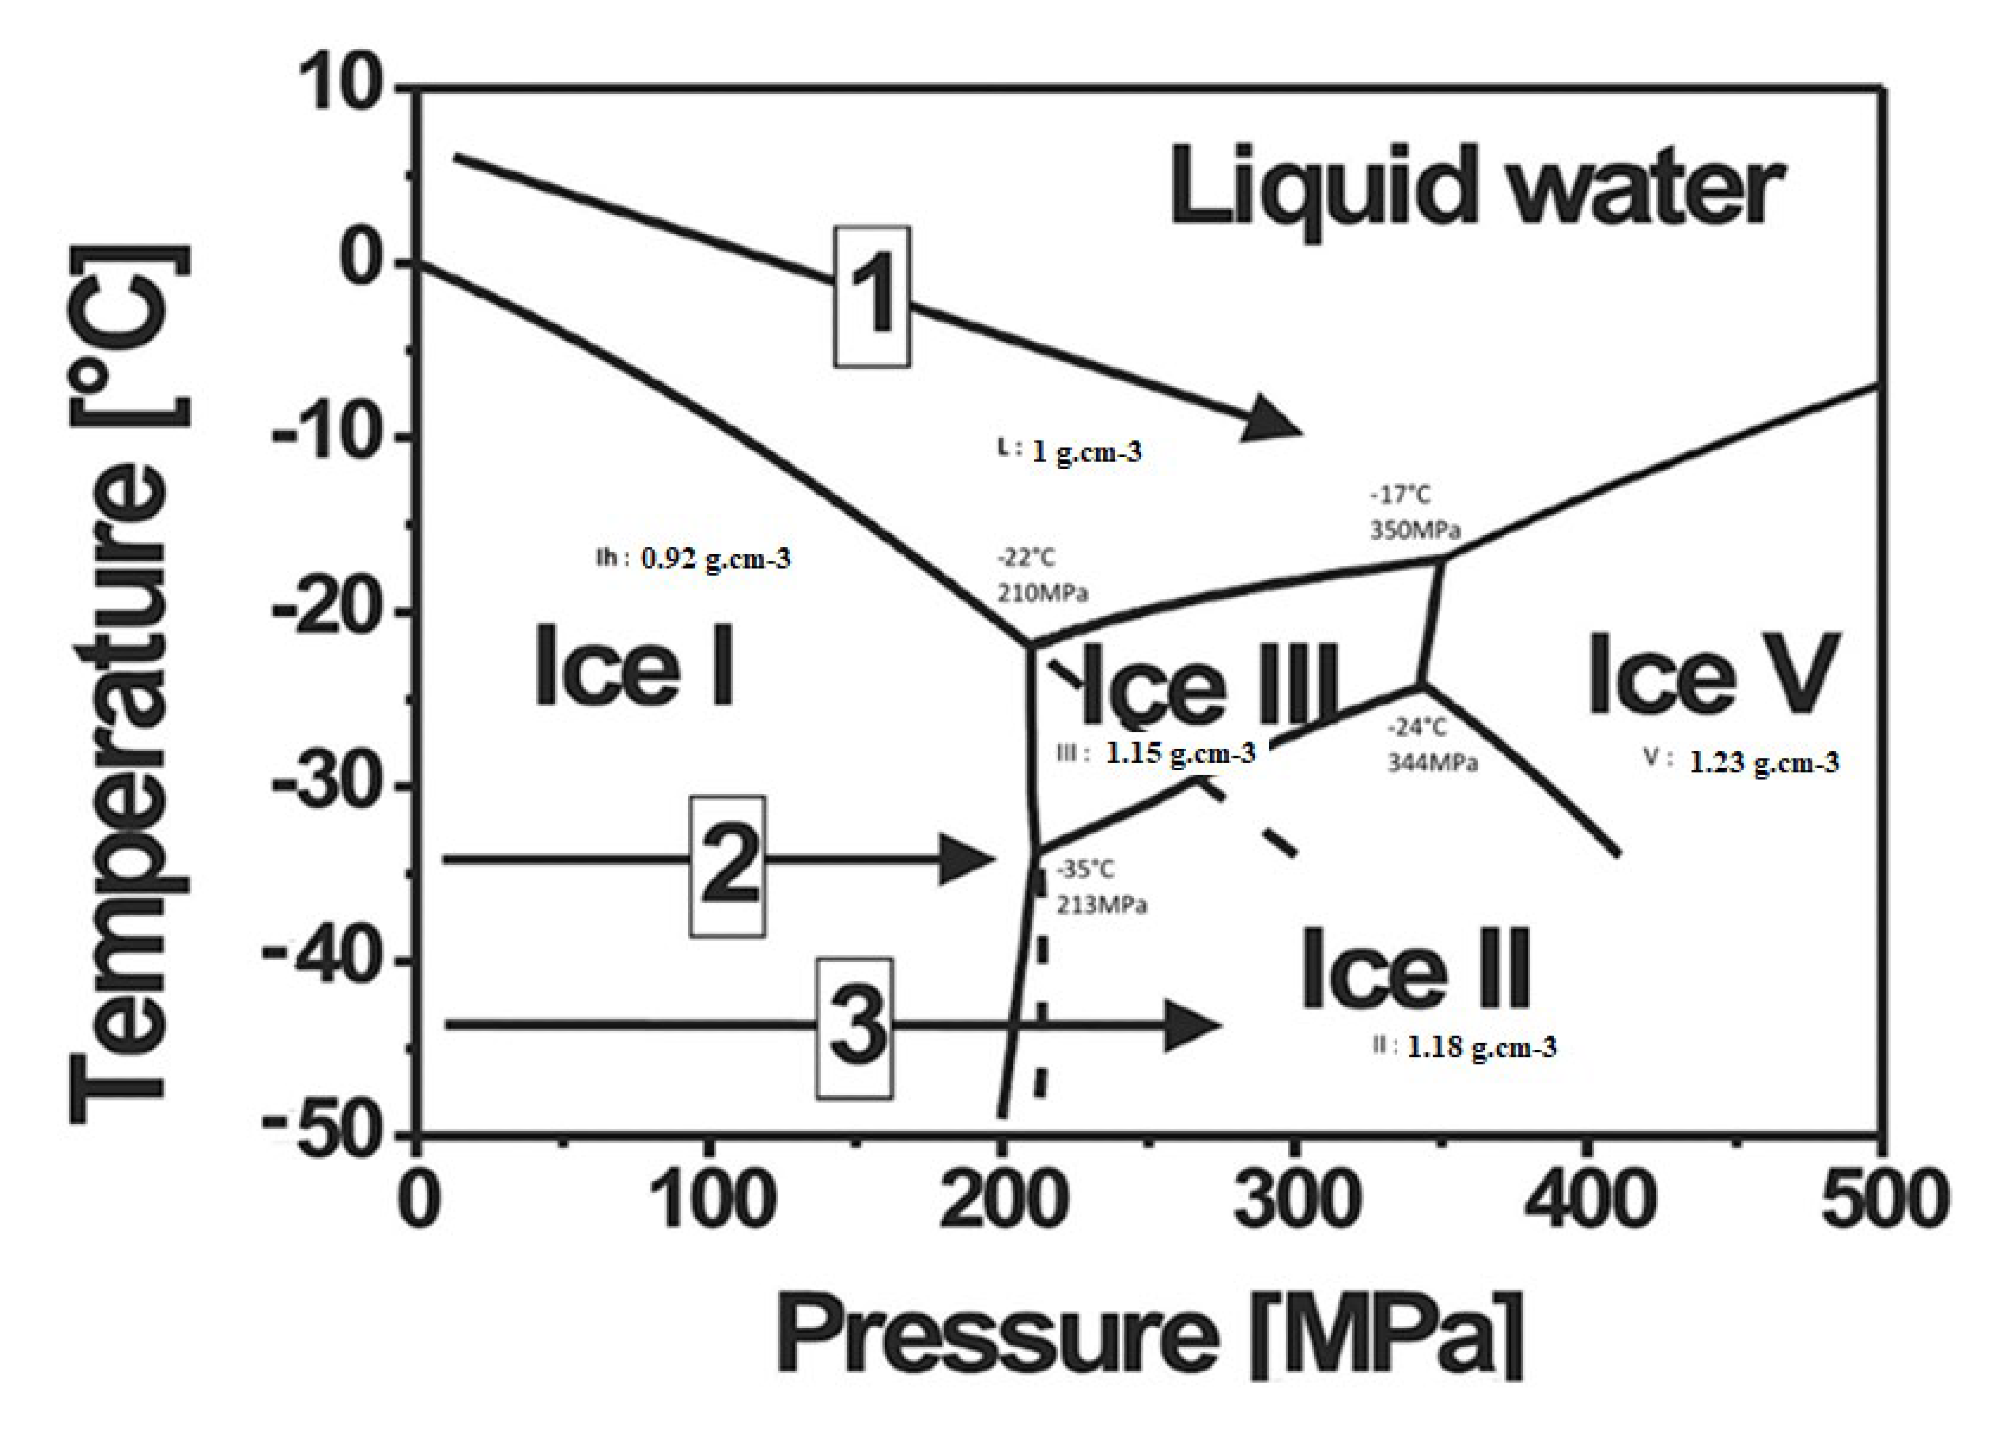 P-T diagram of water and their corresponding densities.